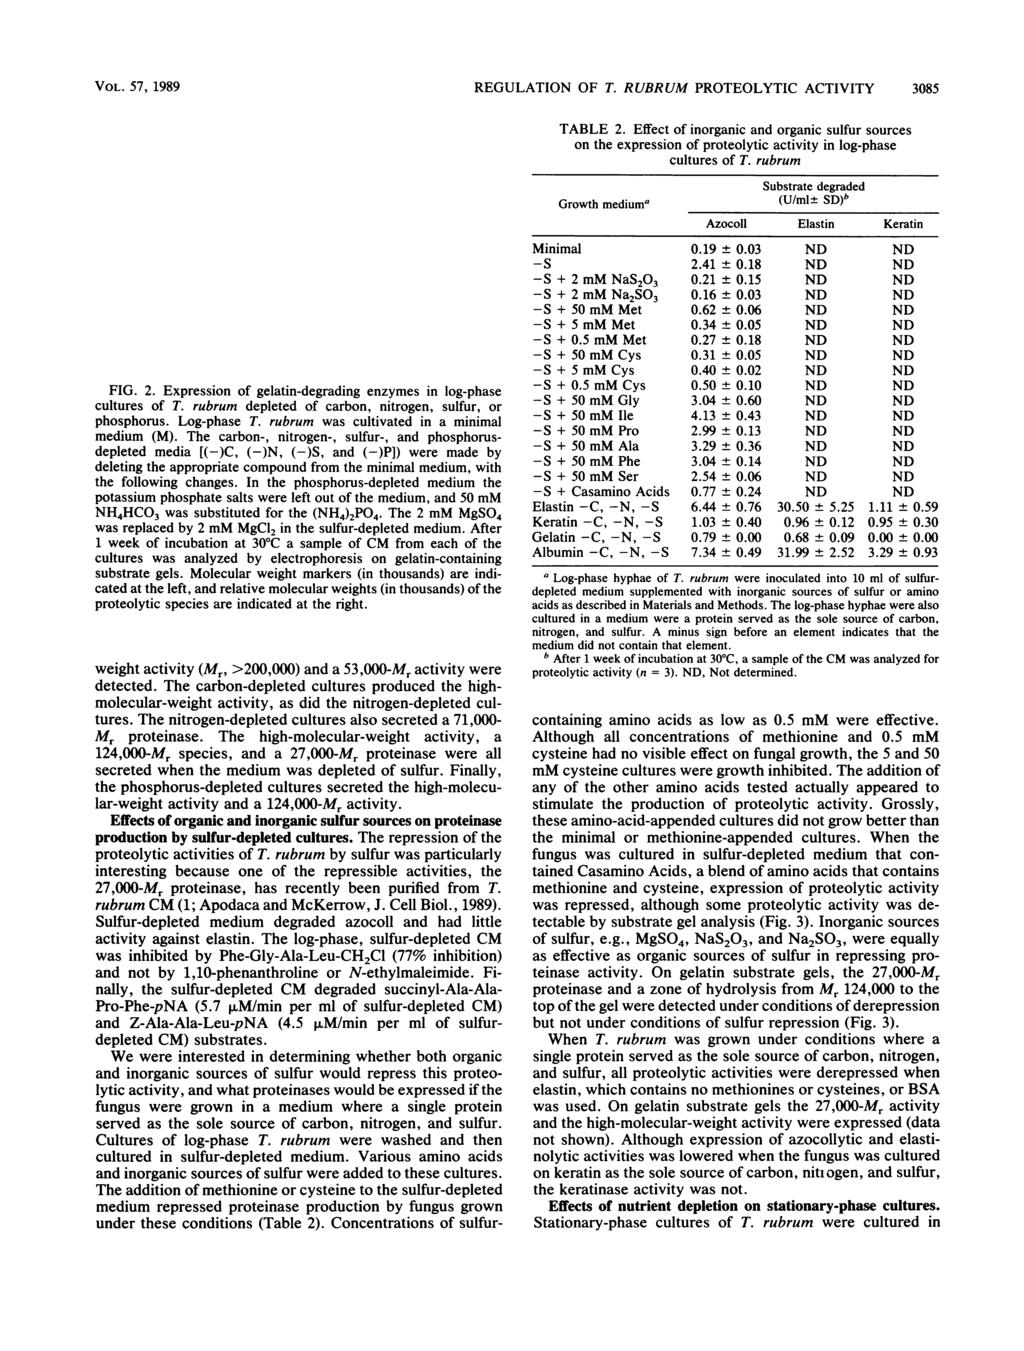 l_s"i 3 i VOL. 57, 1989 REGULATION OF T. RUBRUM PROTEOLYTIC ACTIVITY 3085 -.*- X - - 12 FIG. 2. Expression of gelatin-degrading enzymes in log-phase cultures of T.